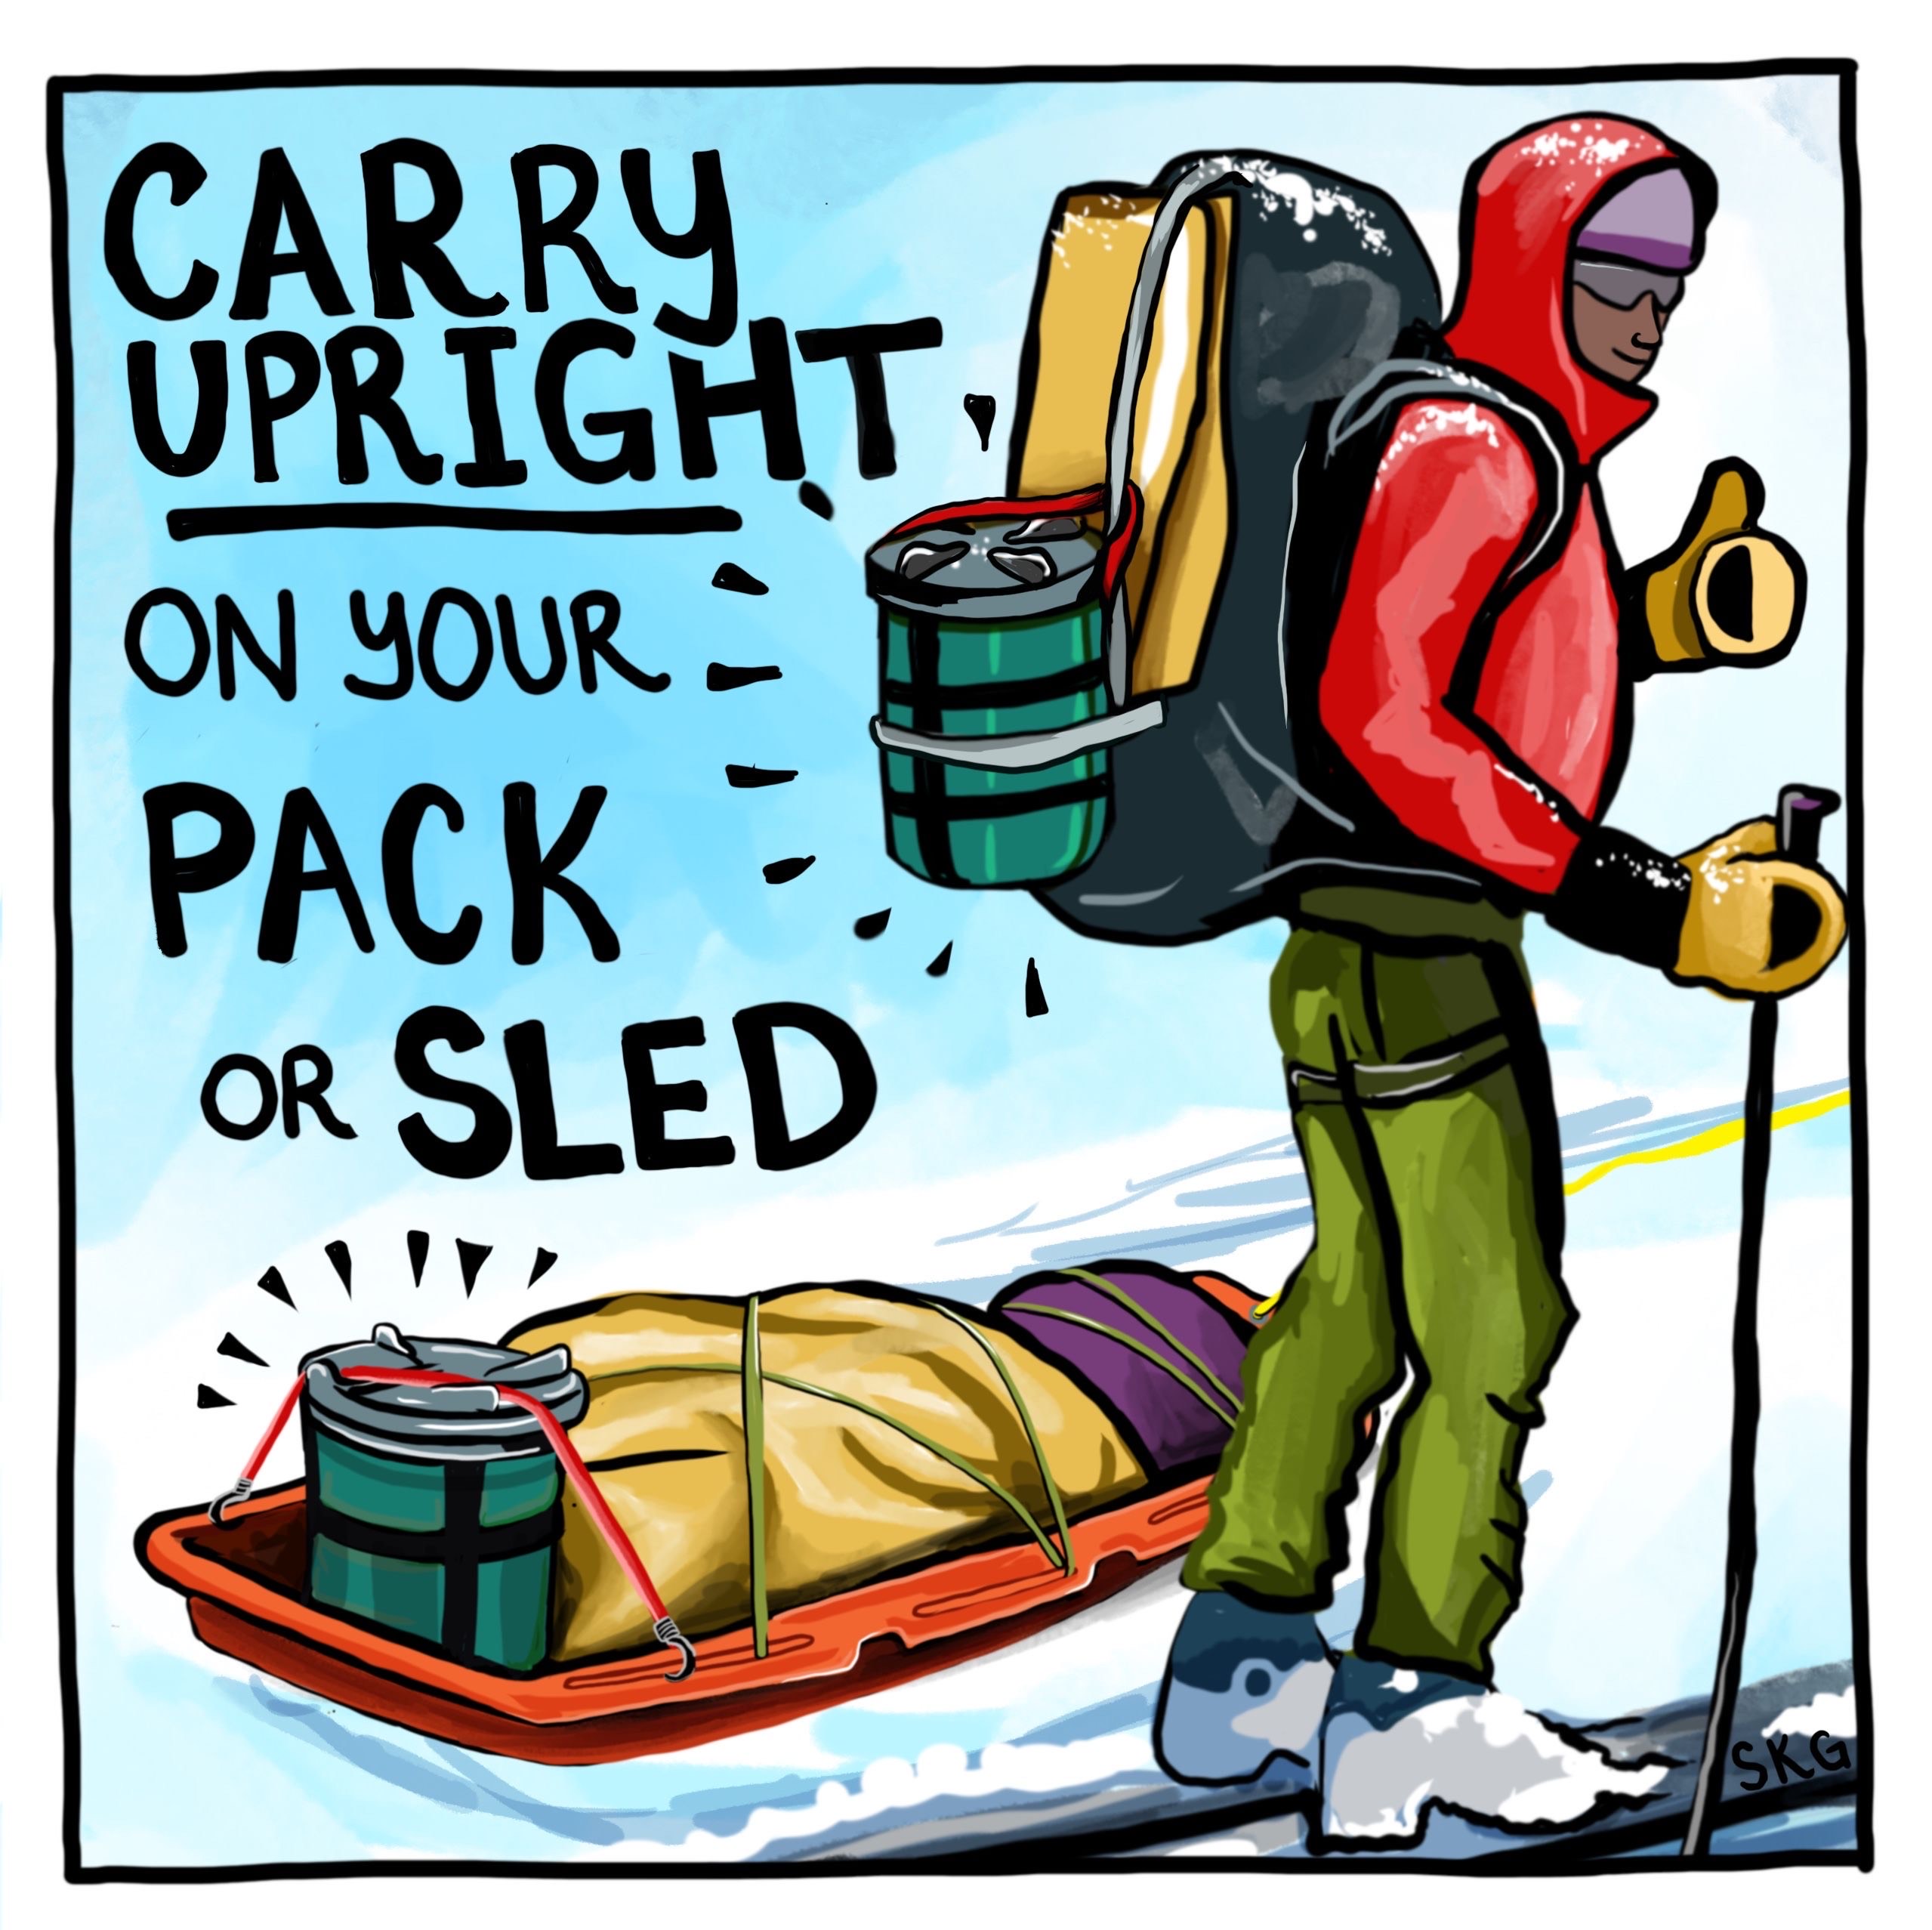 Graphic of a skier with green clean mountain can strapped upright on backpack standing next to a sled packed with an upright can.